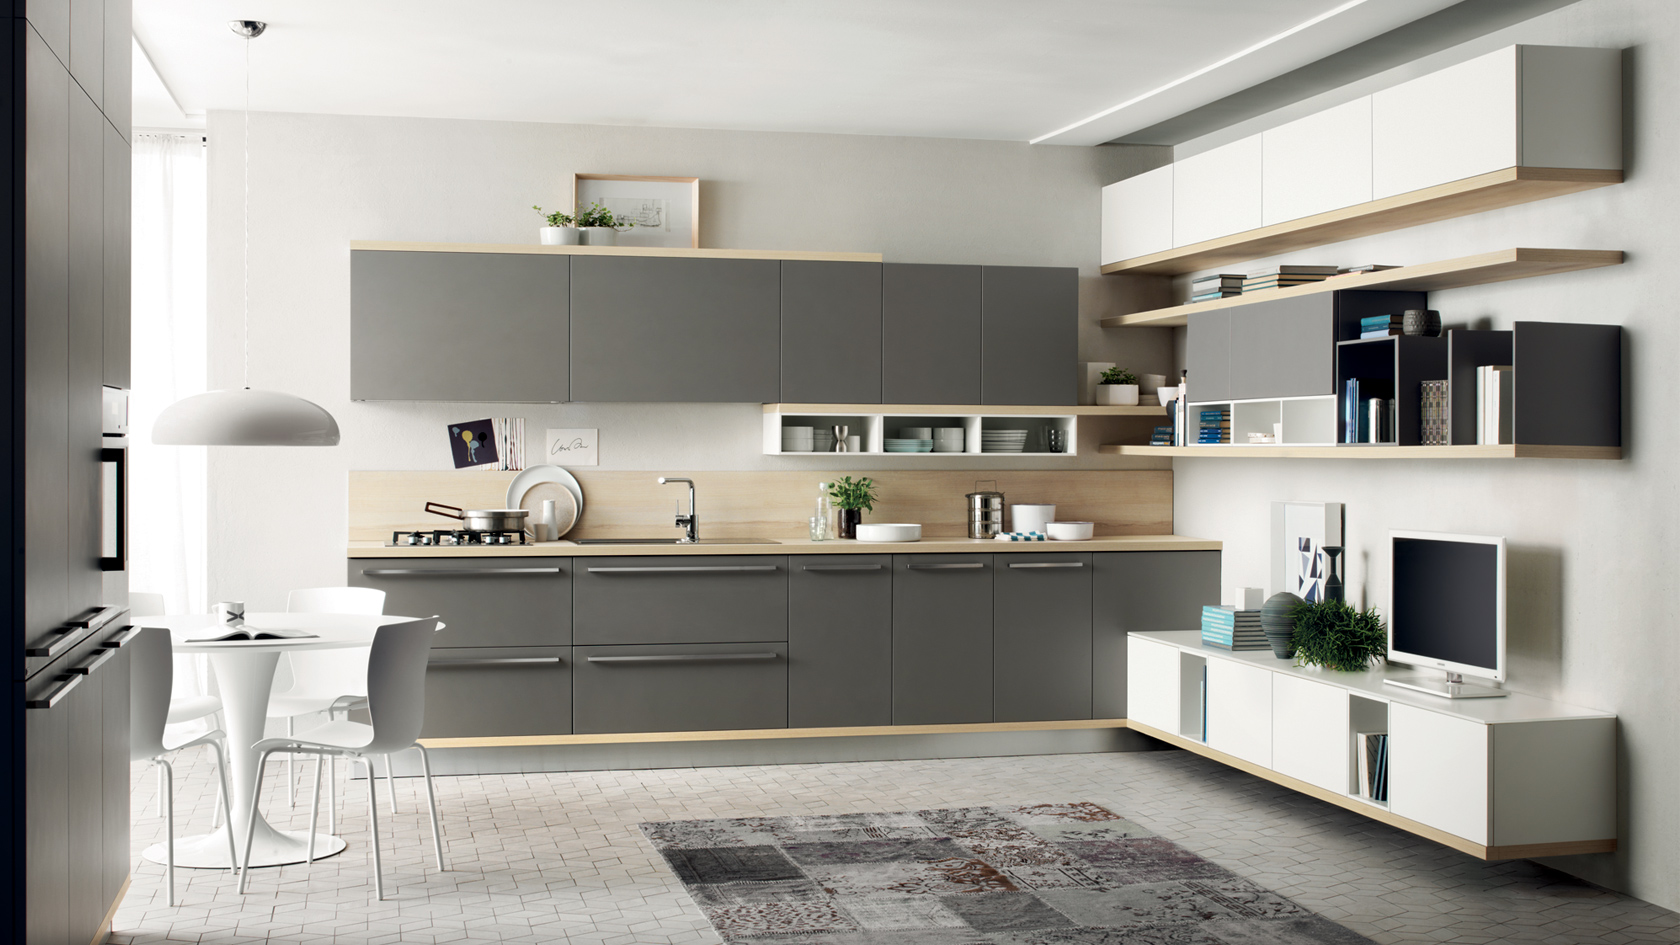 The best choice for a modern kitchen